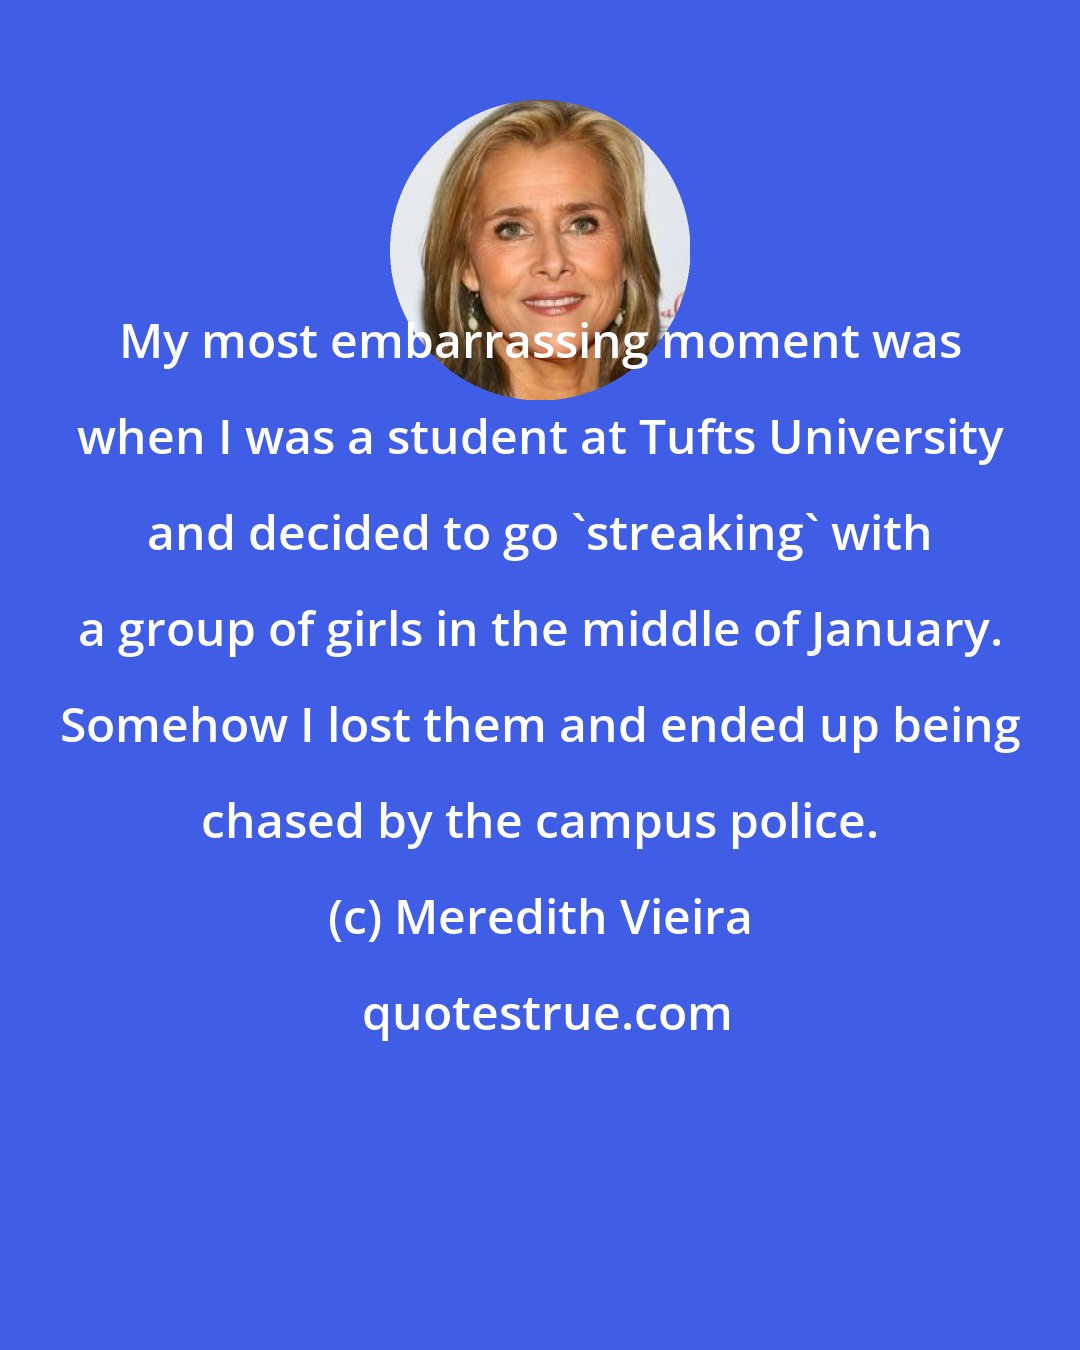 Meredith Vieira: My most embarrassing moment was when I was a student at Tufts University and decided to go 'streaking' with a group of girls in the middle of January. Somehow I lost them and ended up being chased by the campus police.